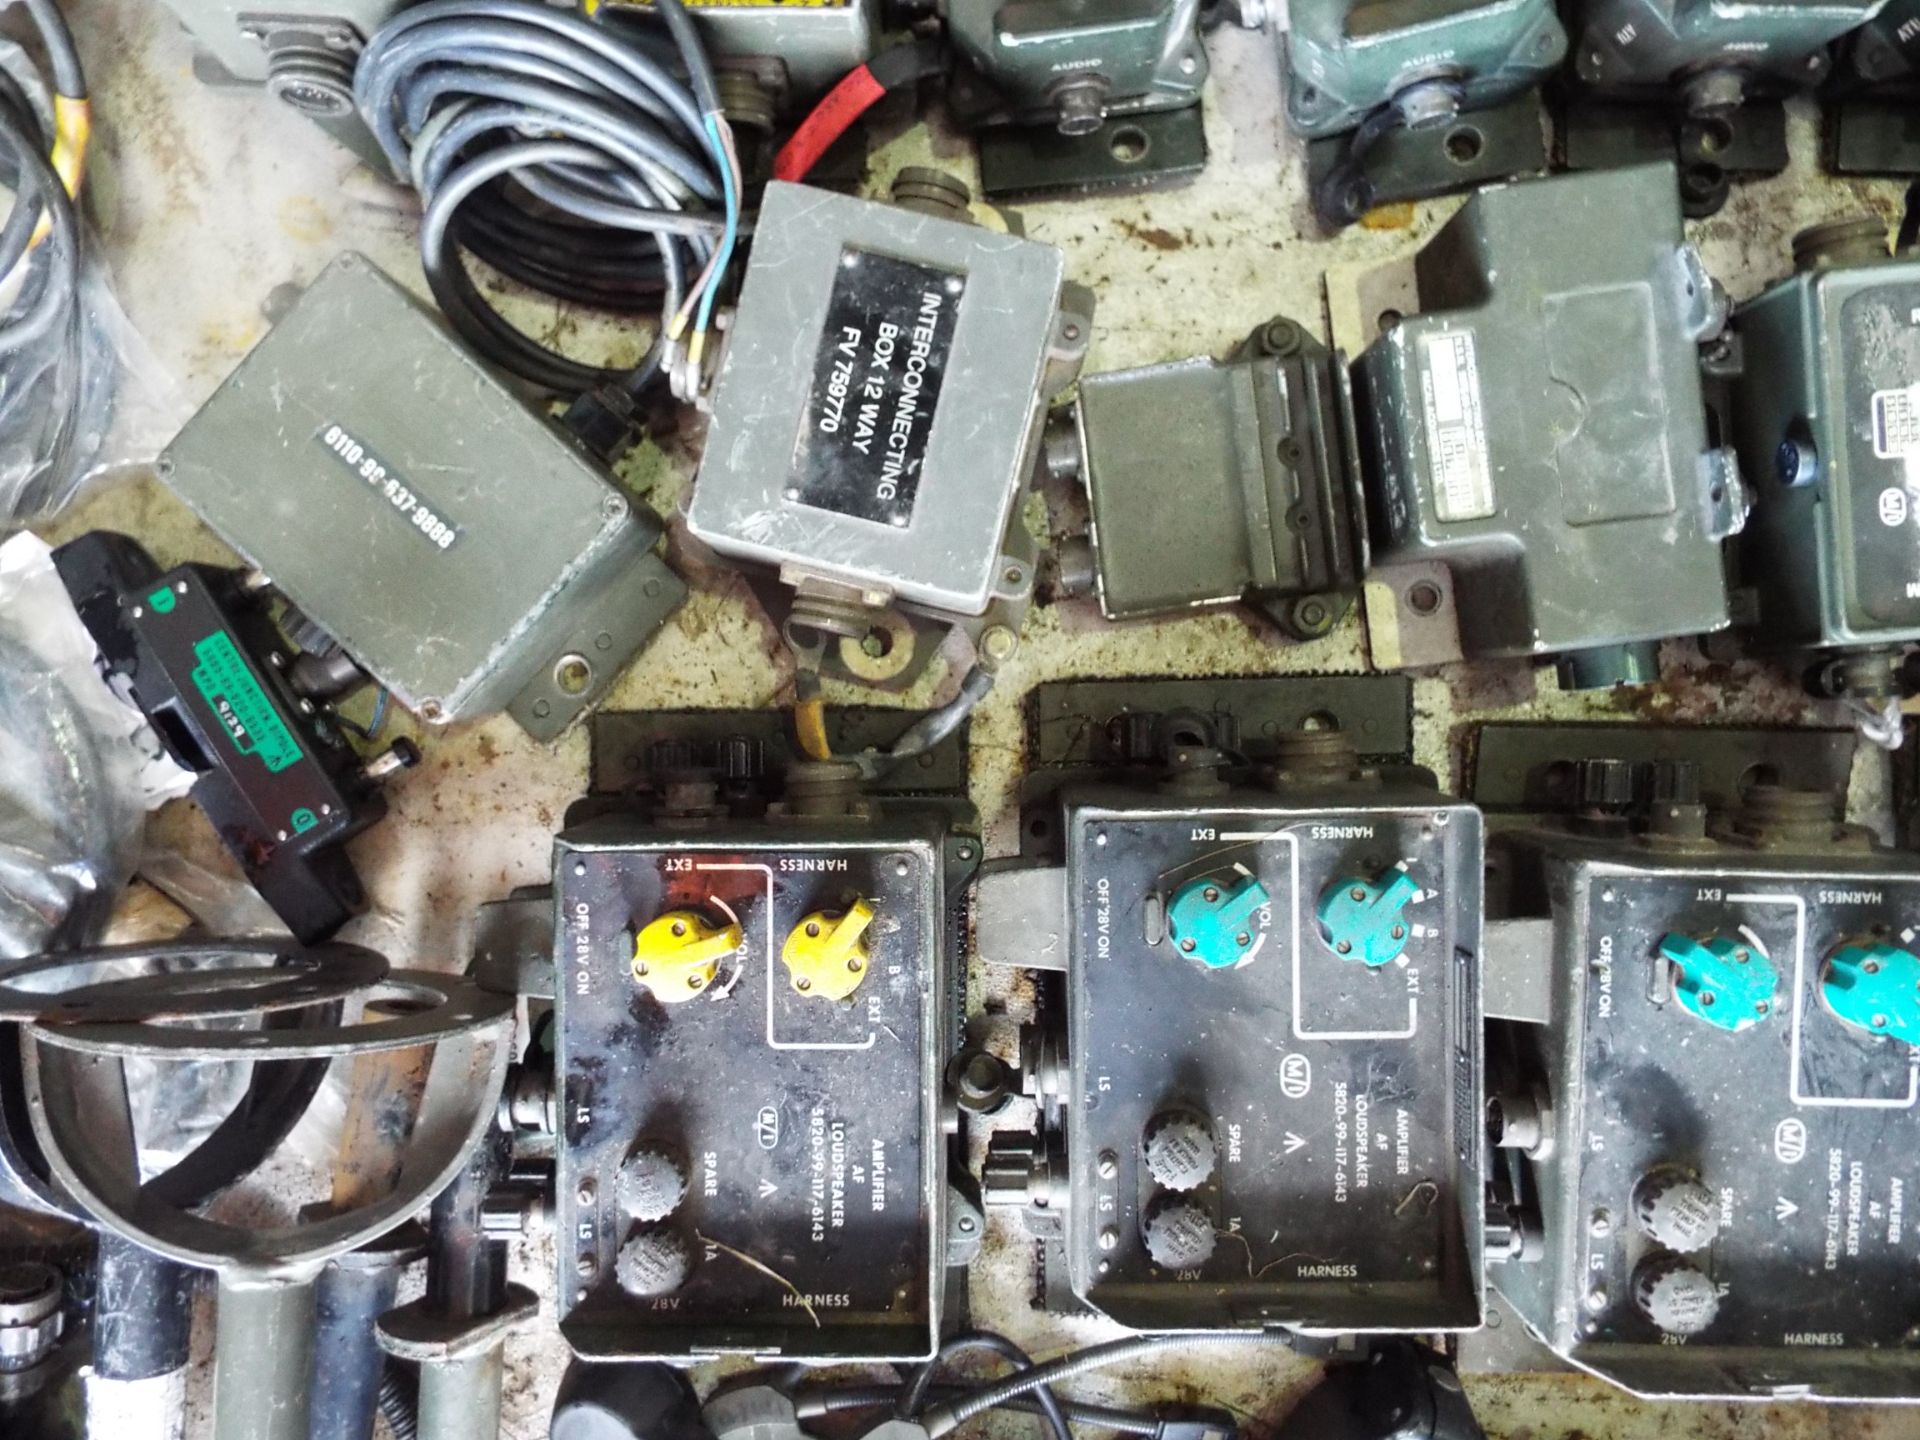 Mixed Stillage of Clansman Inc. Interconnecting Boxes, Headsets, Cables, Antenna Mounts etc etc - Image 5 of 13